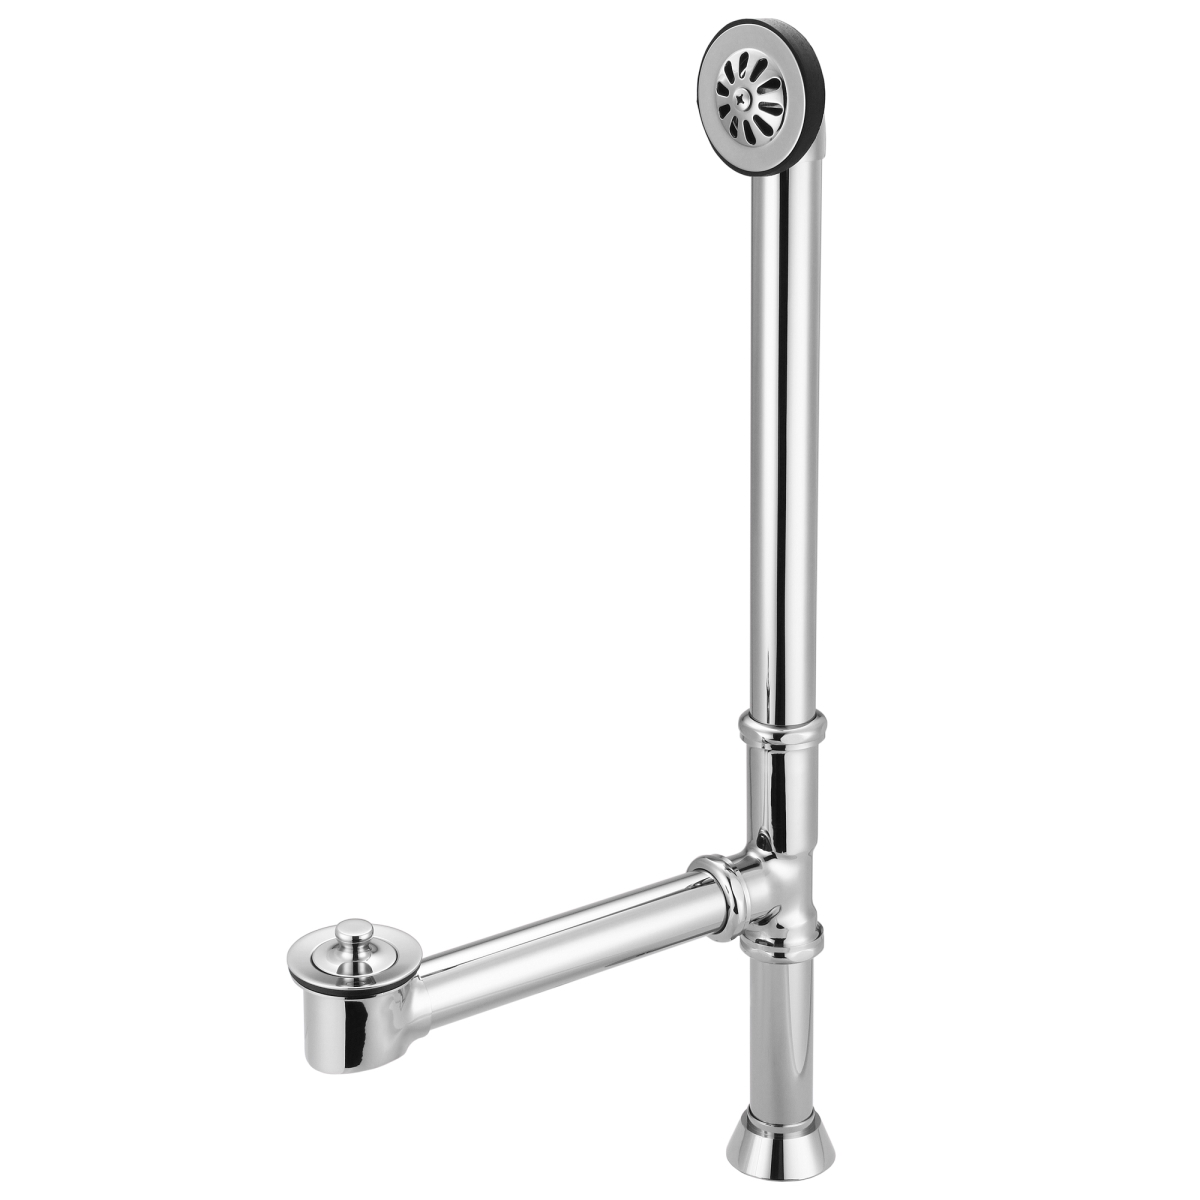 Wo-0001-01 Lift & Turn Exposed Finish Tub Drain For Claw Foot Or Other Elegant Tubs - Silver & Chrome